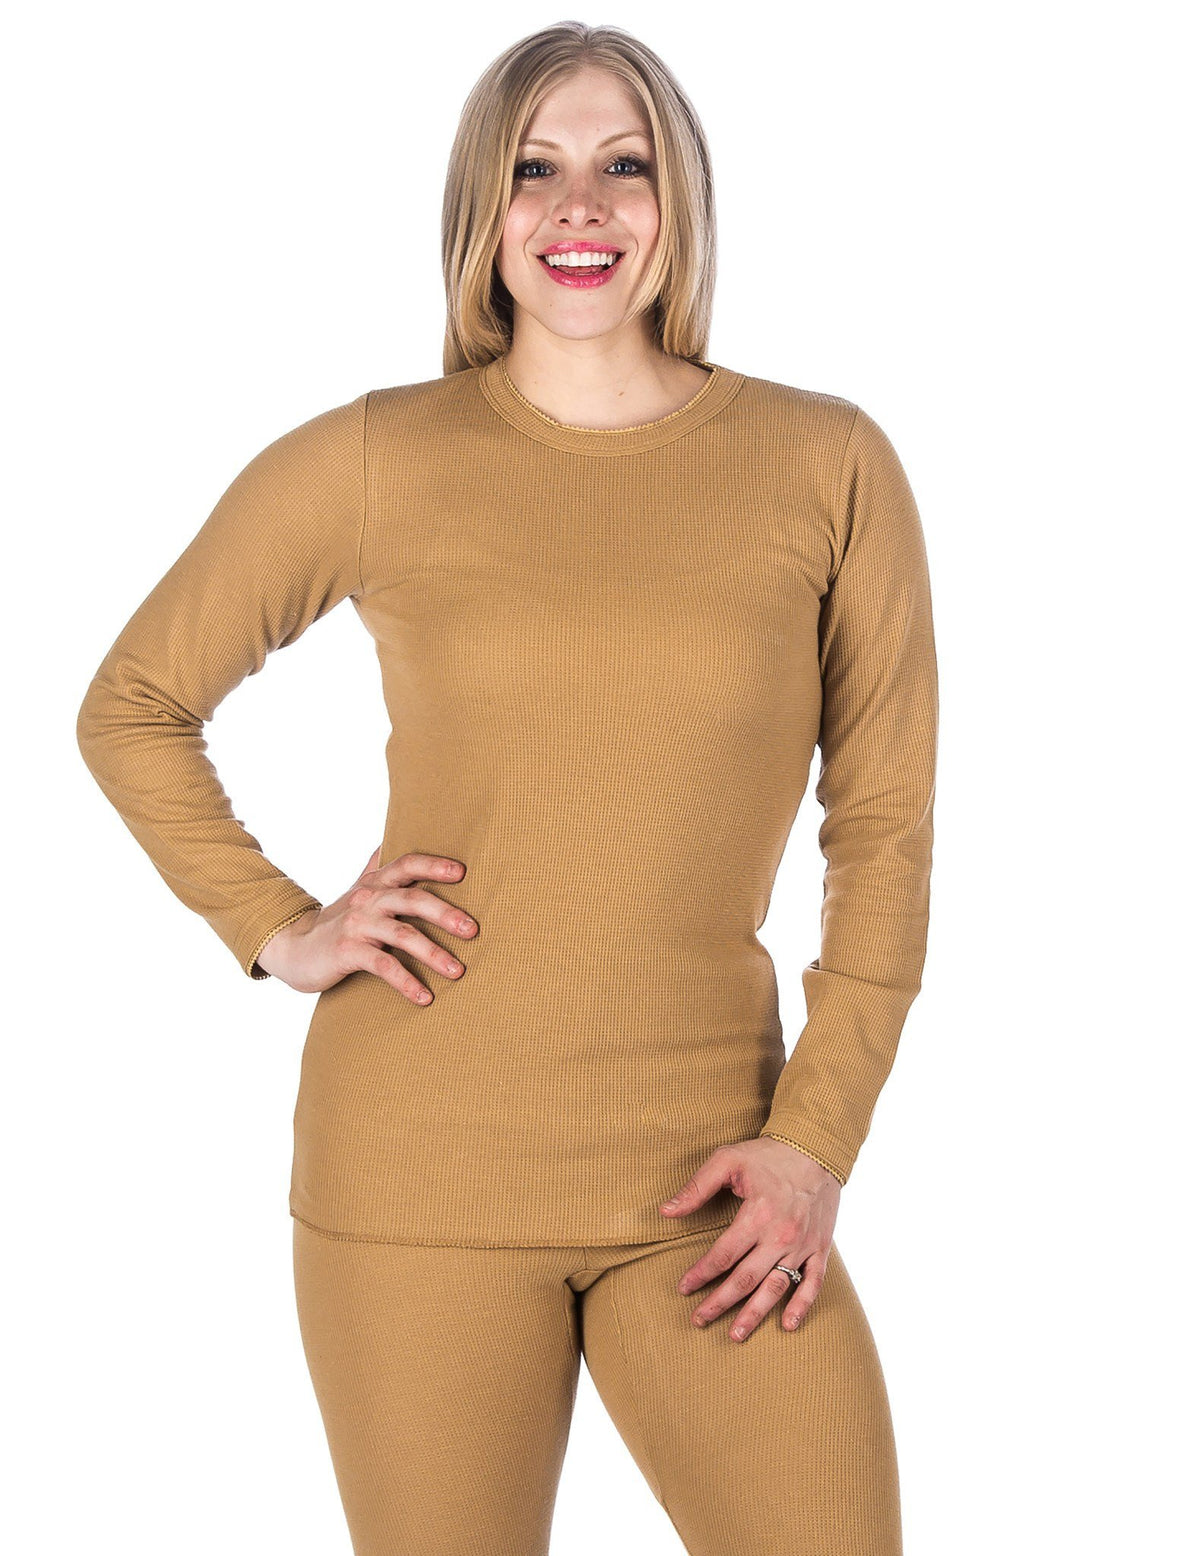 Women's Classic Waffle Knit Thermal Crew Top - Champagne